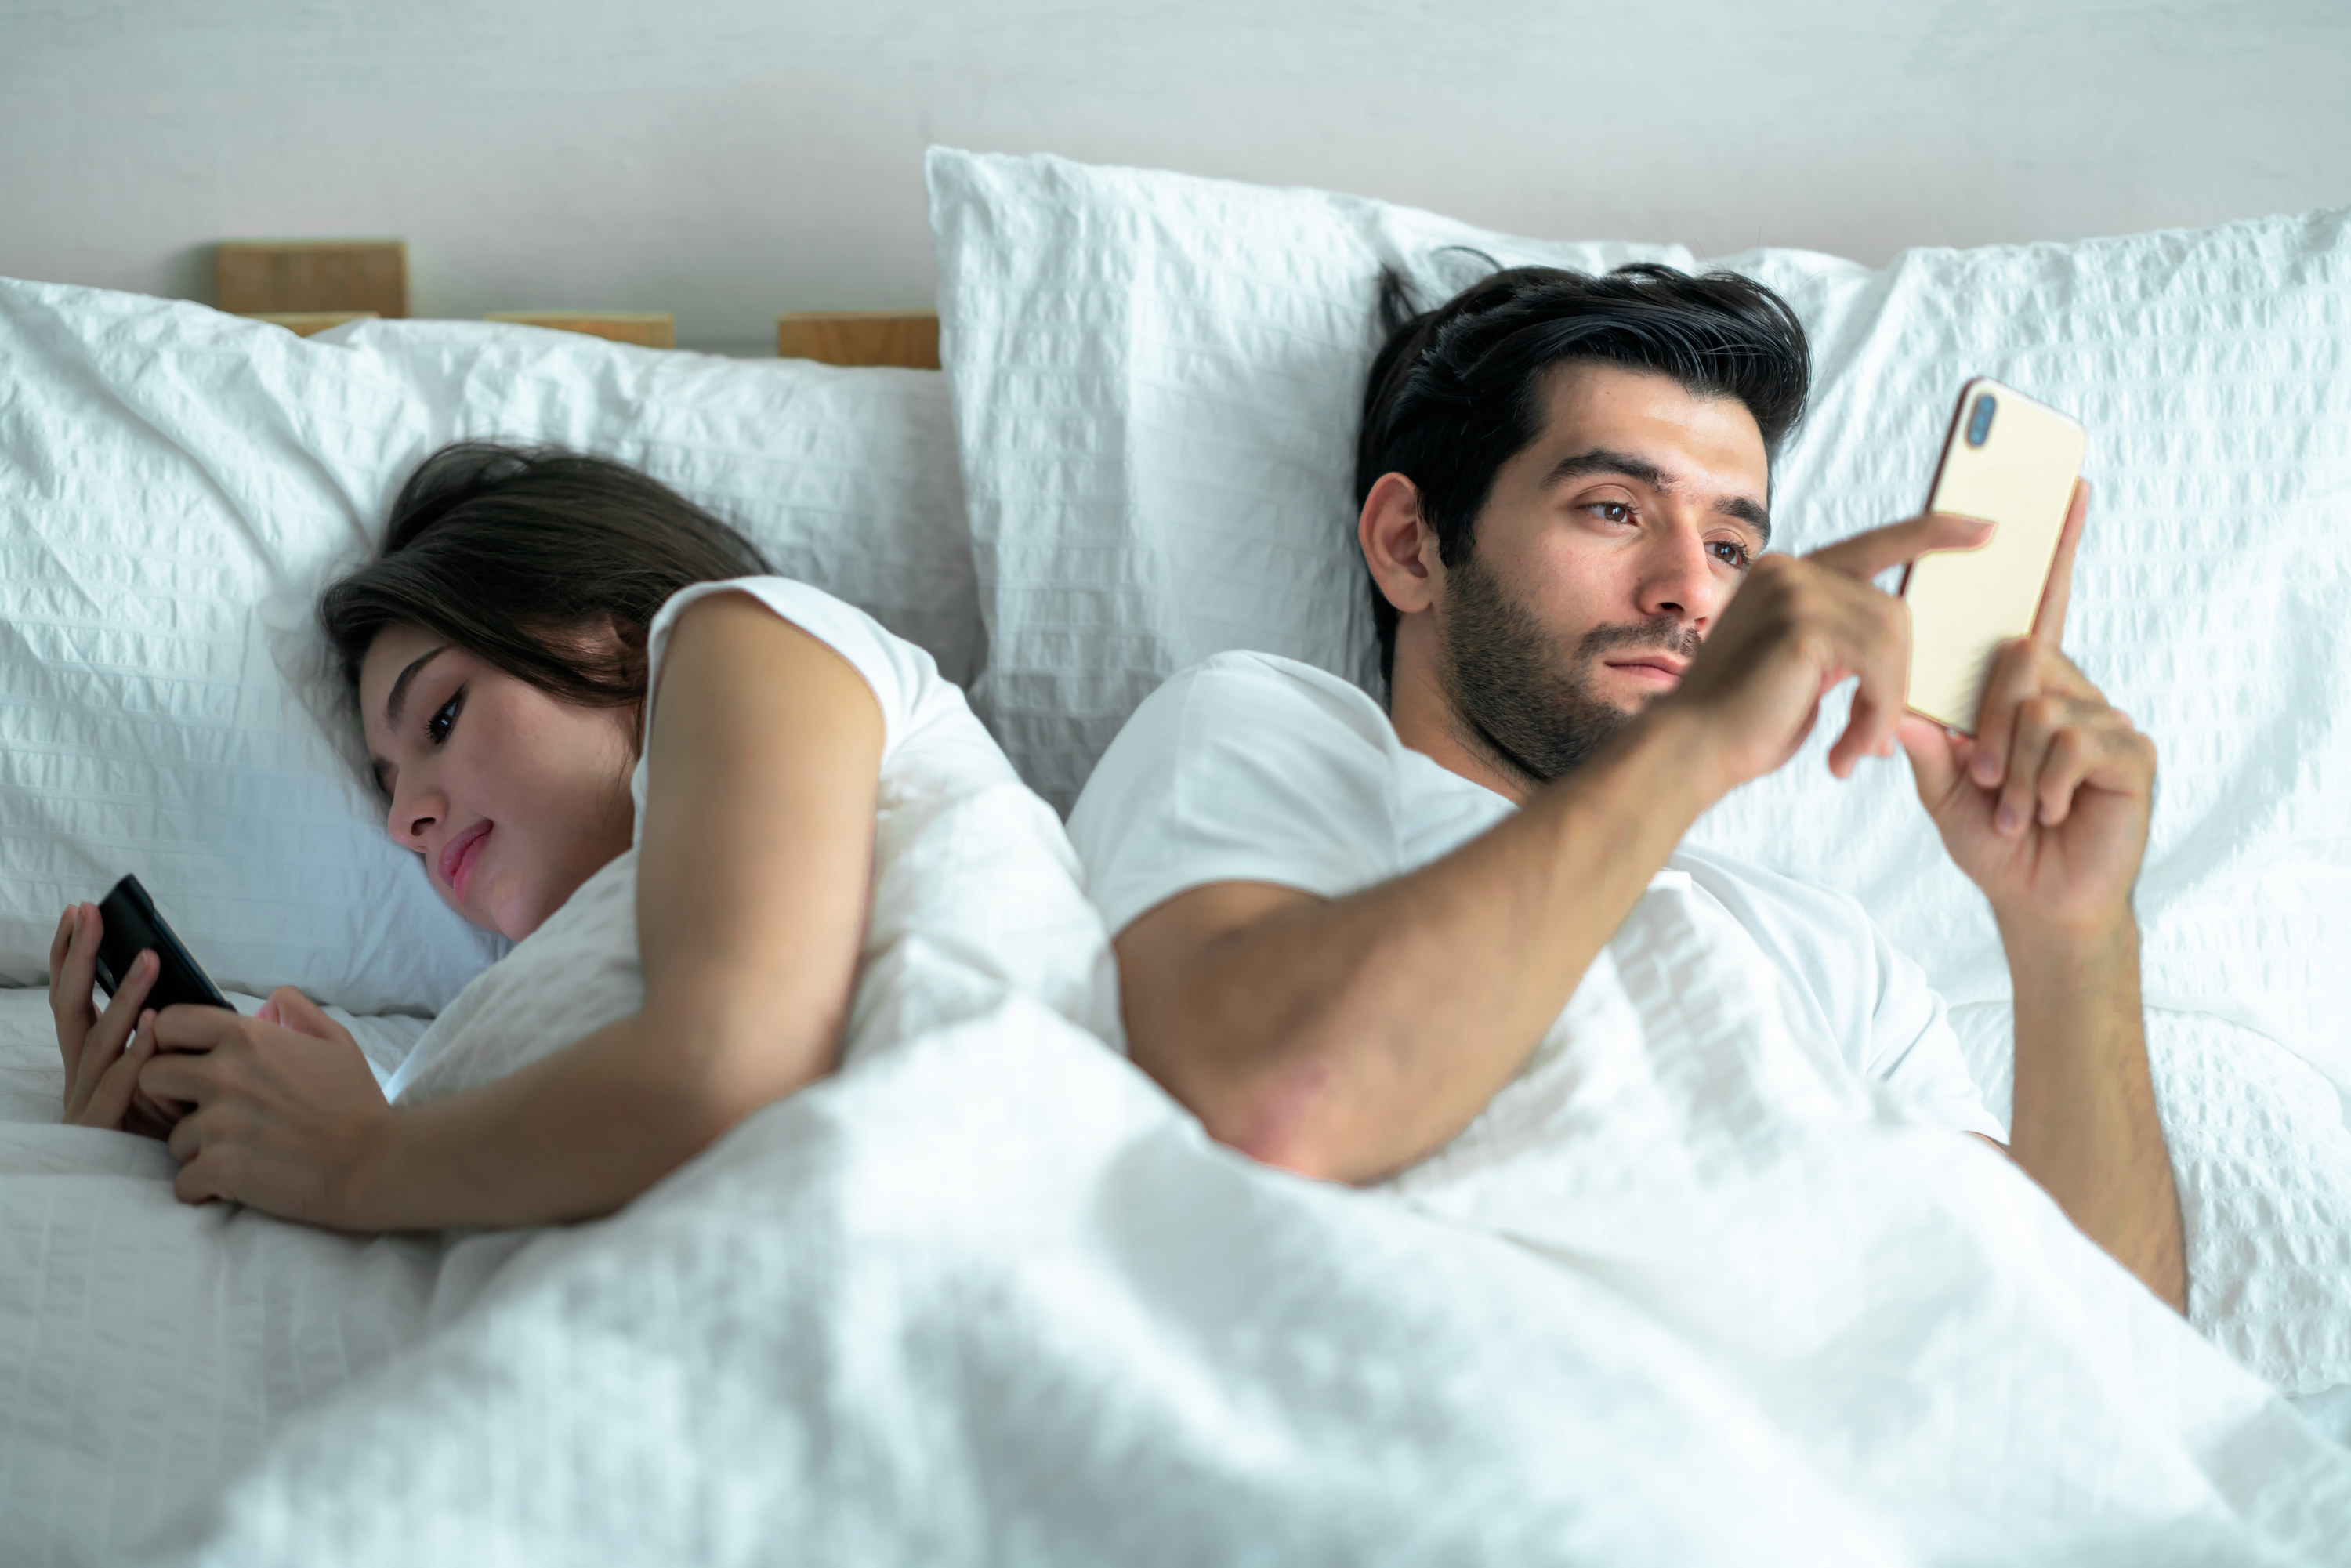 A man and woman laying in bed, each on their cell phones.